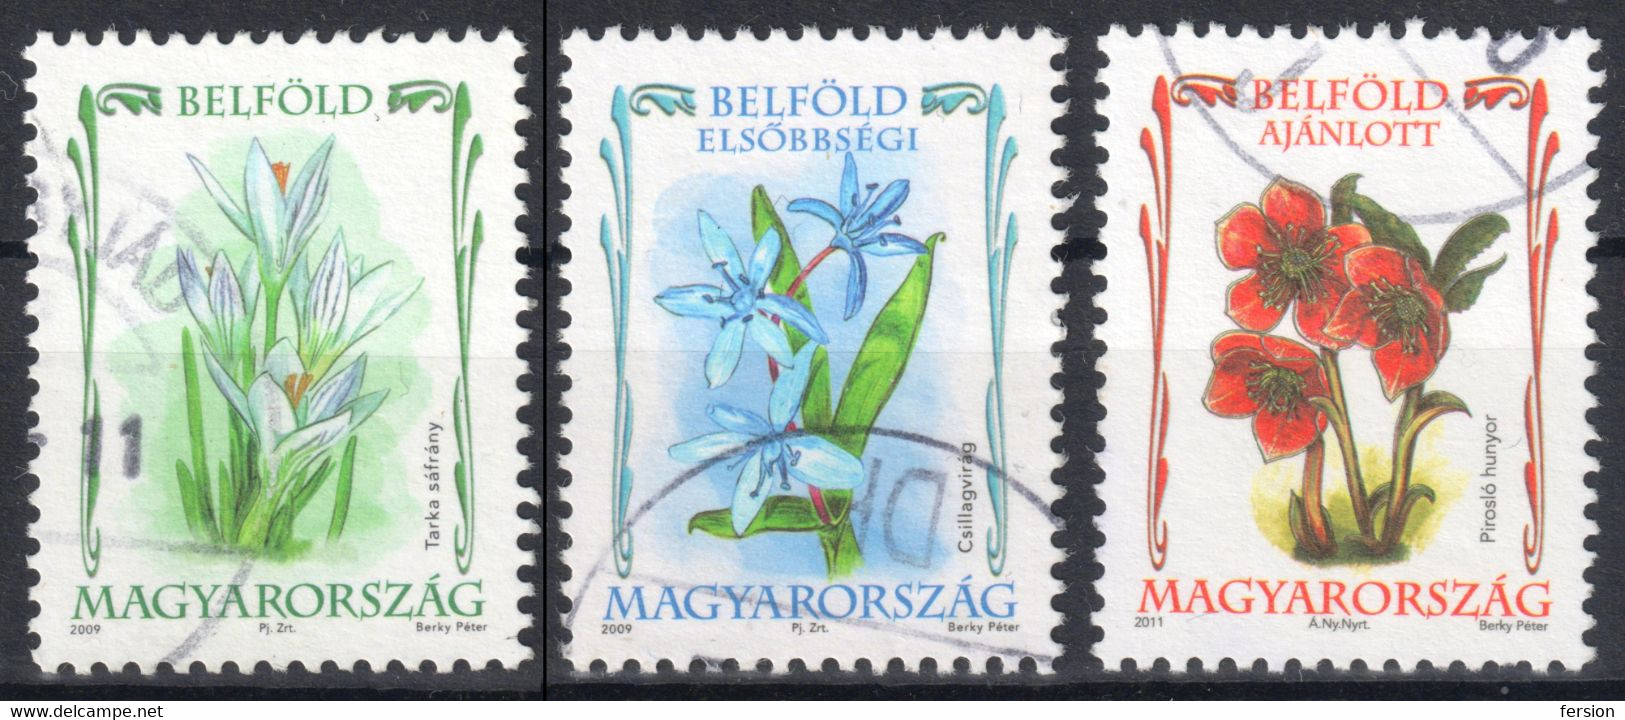 2009 2011 Hungary - Protected Flower Fleur Blume - REGISTERED PRIORITY Stamps / Hellebore / Crocus / Scilla - Used Stamps